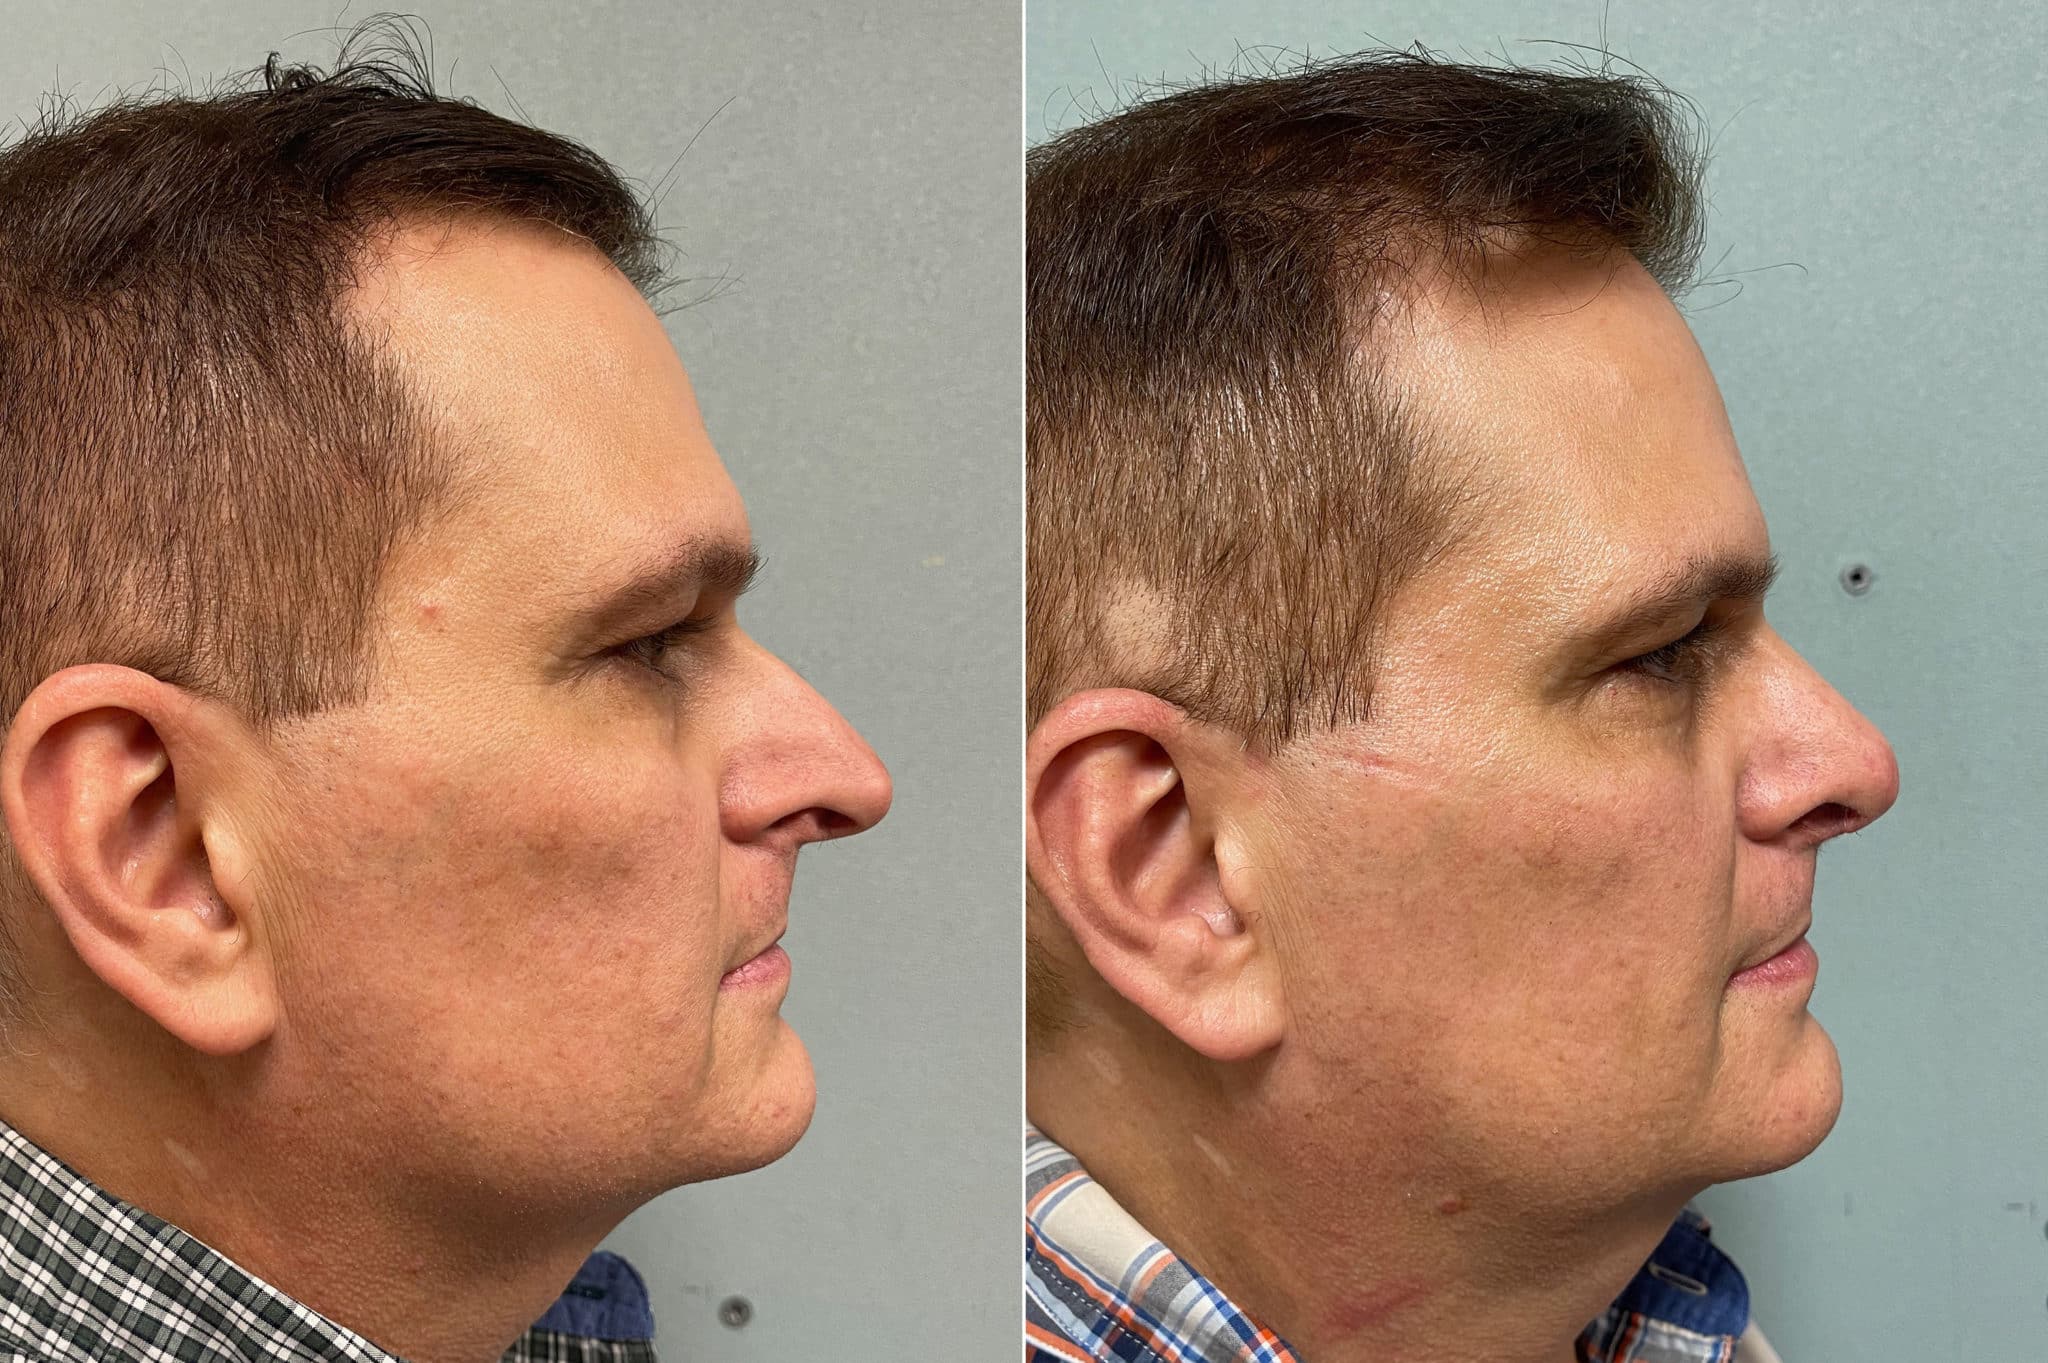 patient-200-rhinoplasty-before-after-1-2048x1363